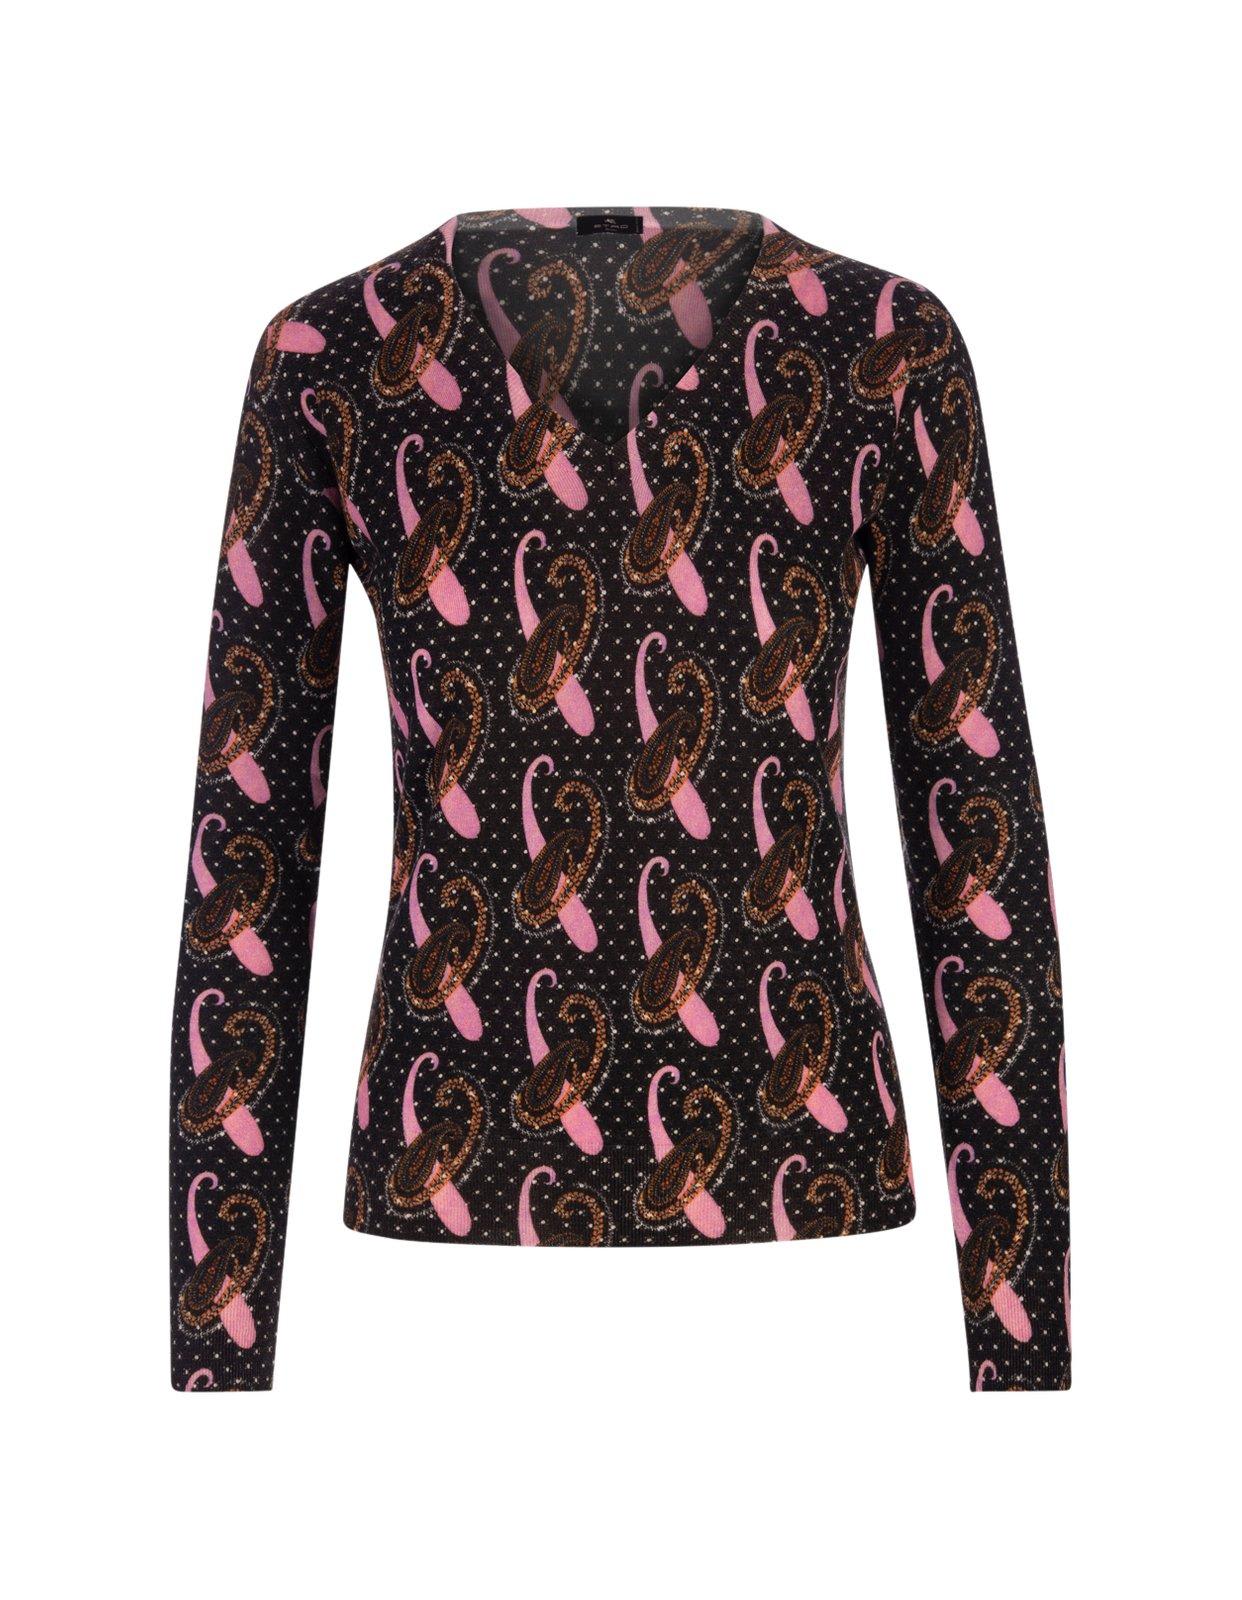 ETRO ALL-OVER PAISLEY PATTERNED V-NECK SWEATER